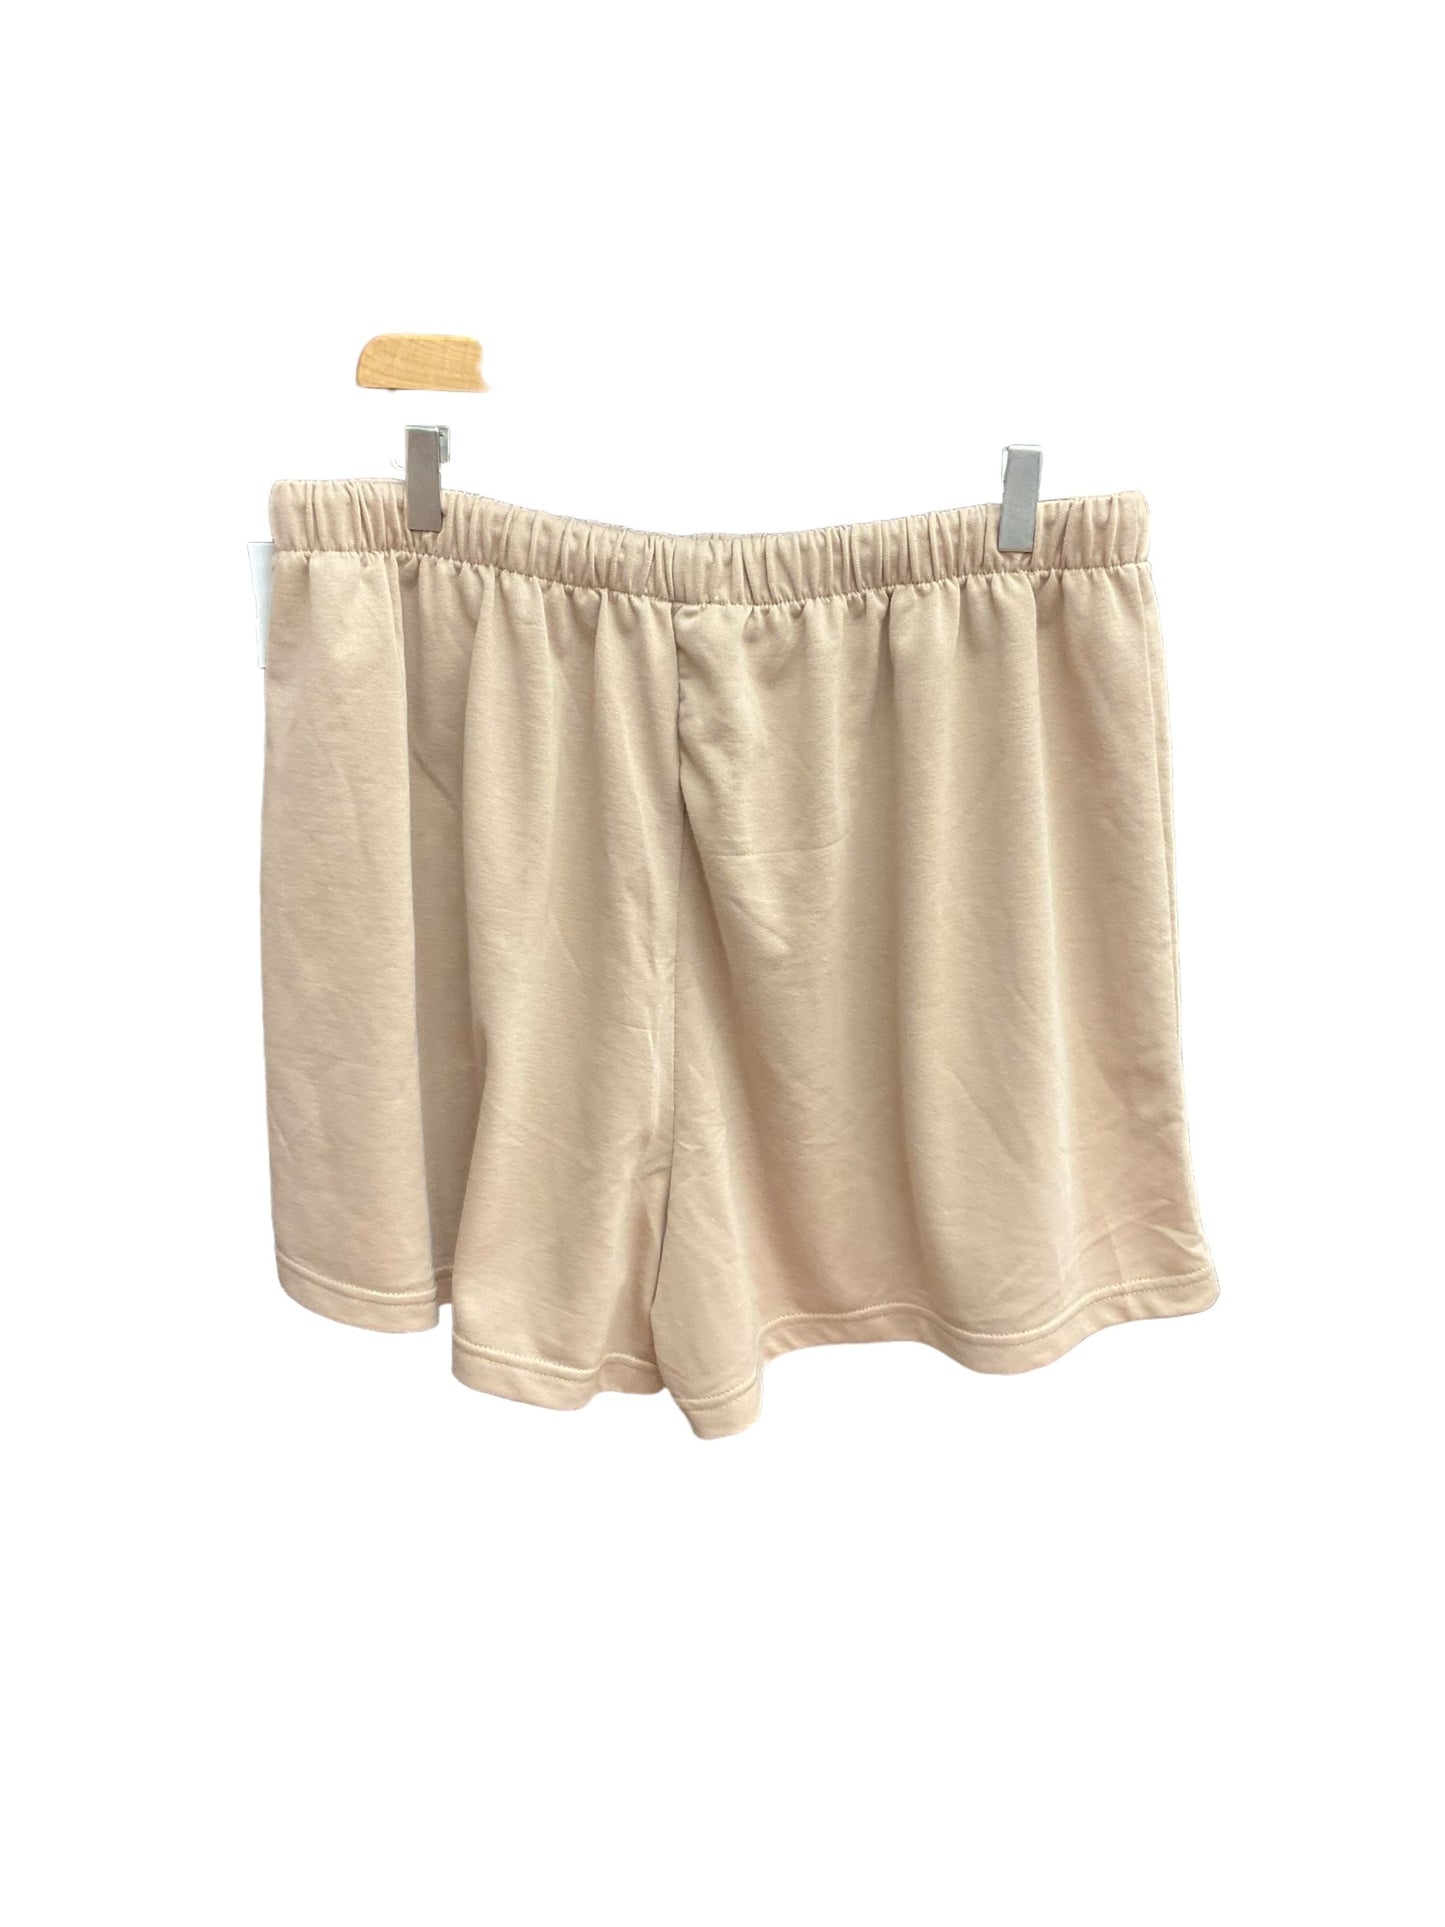 Tan Shorts Set Not Your Daughters Jeans, Size 1x